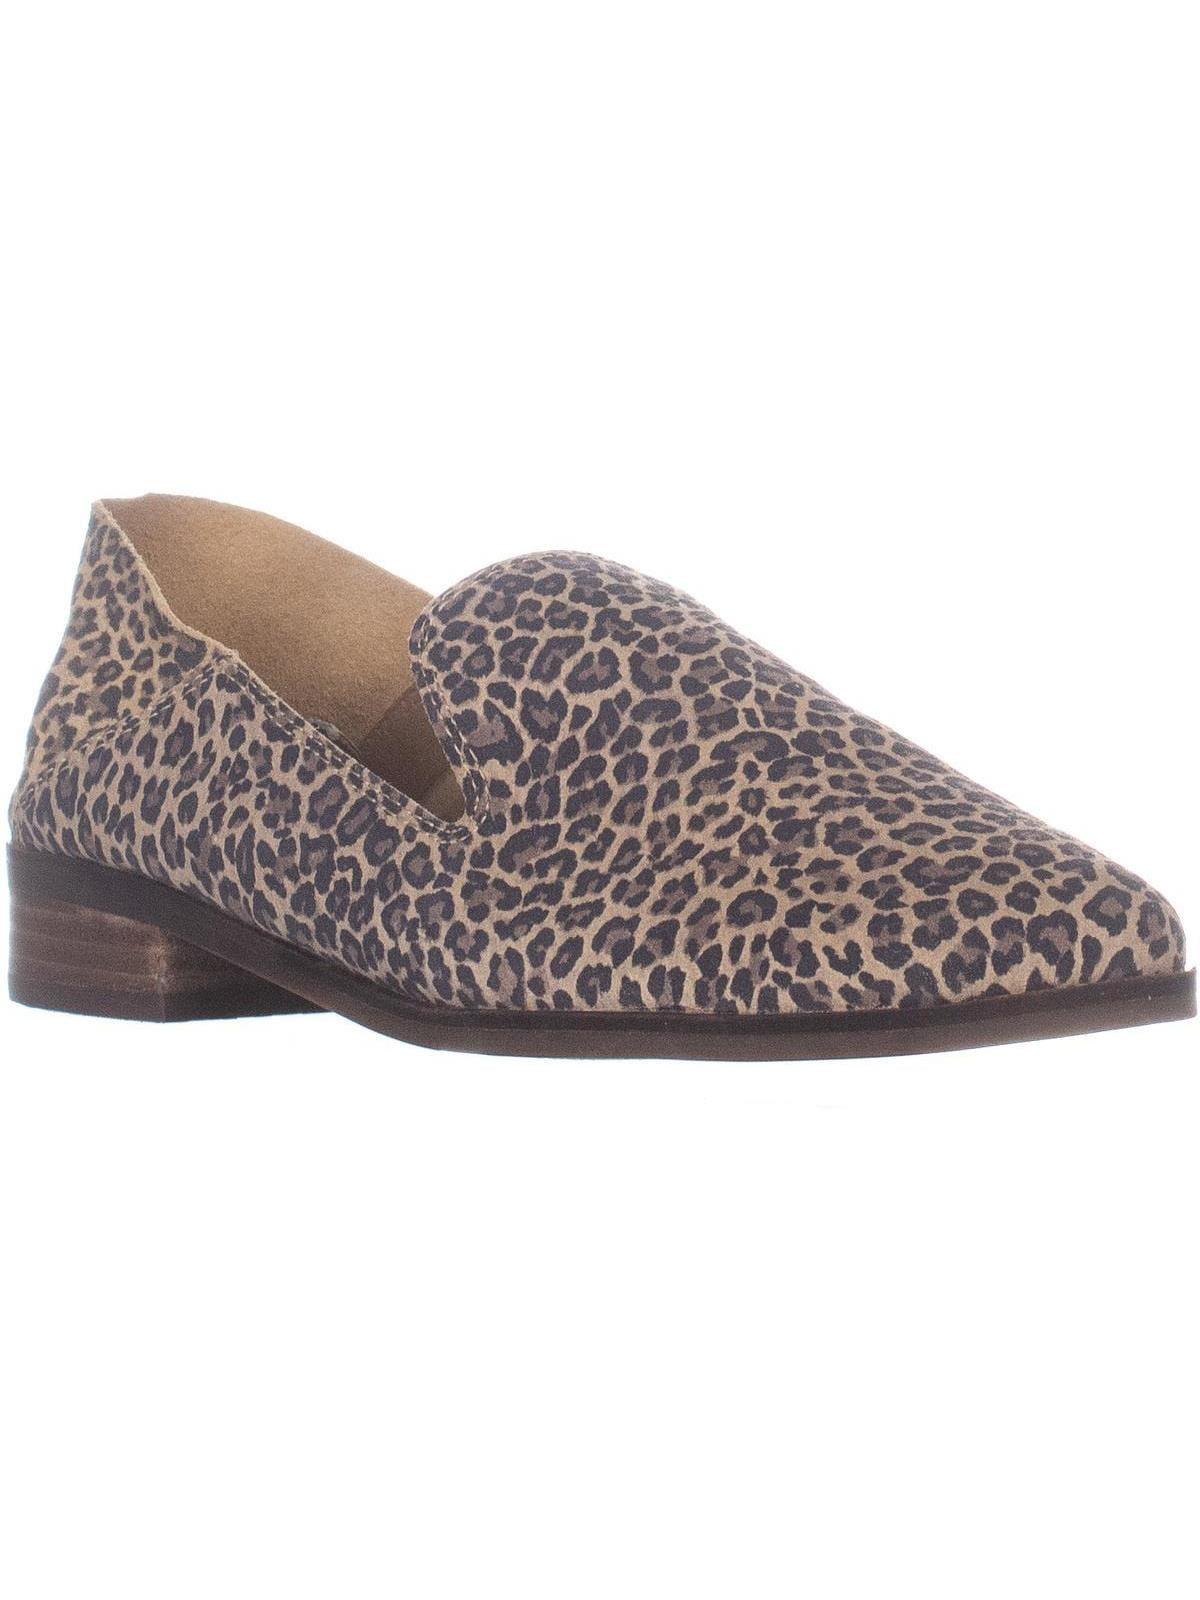 lucky brand shoes loafers